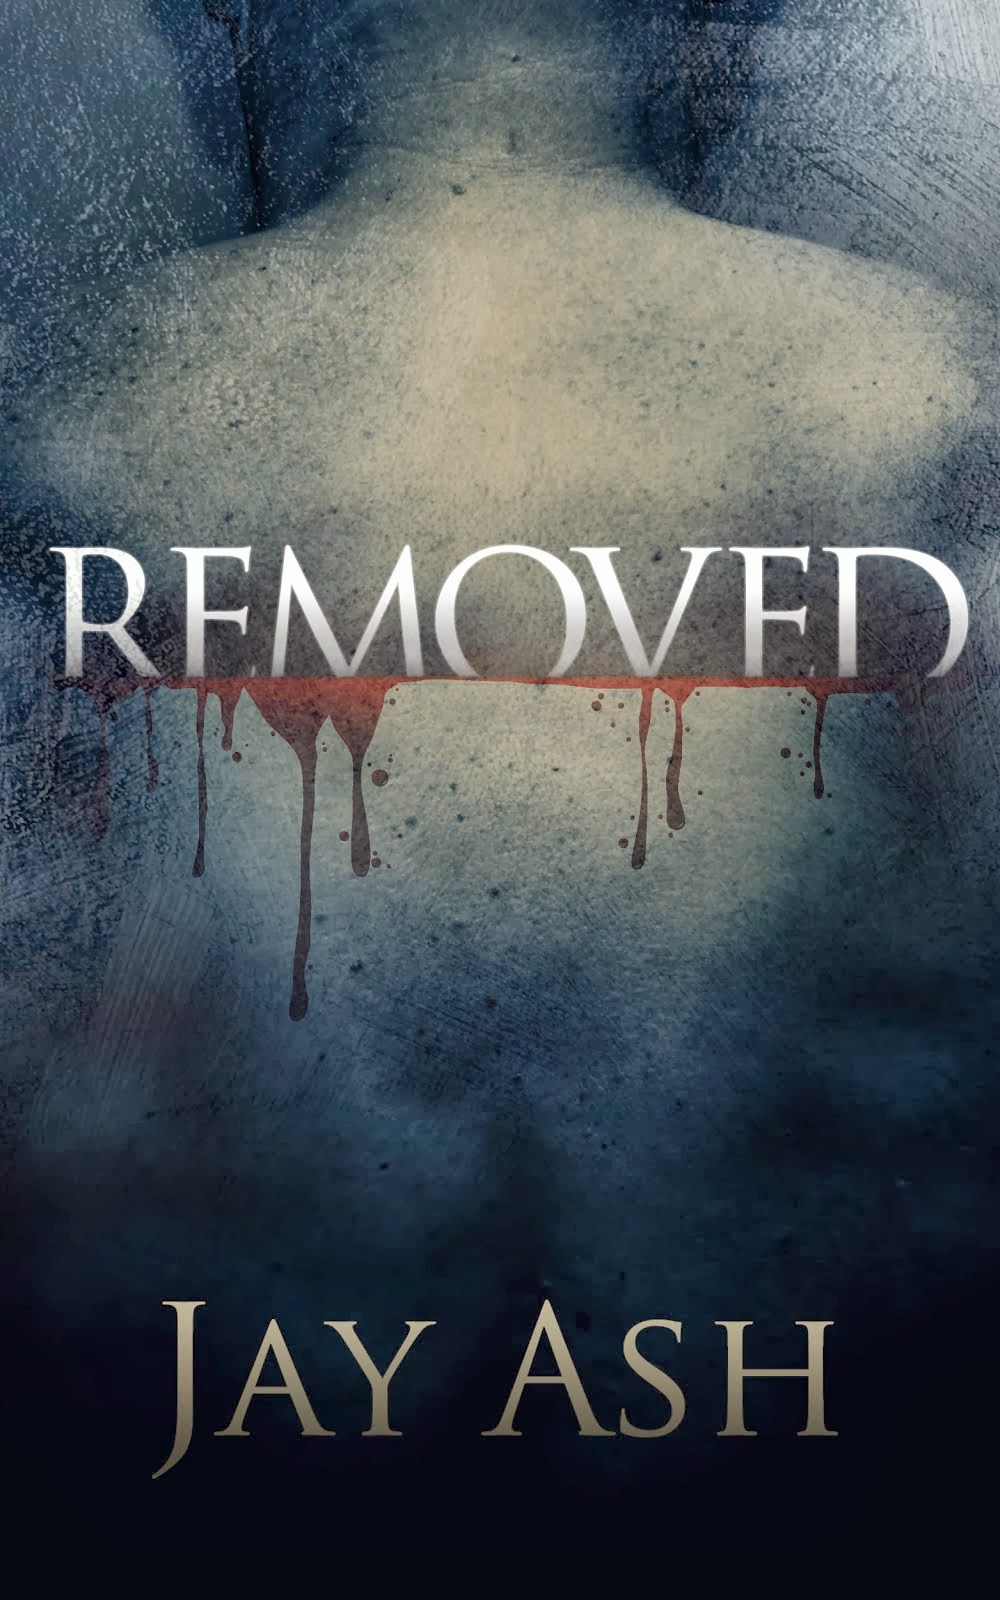 Removed (A Thriller) - 99 CENTS FOR HALLOWEEN!